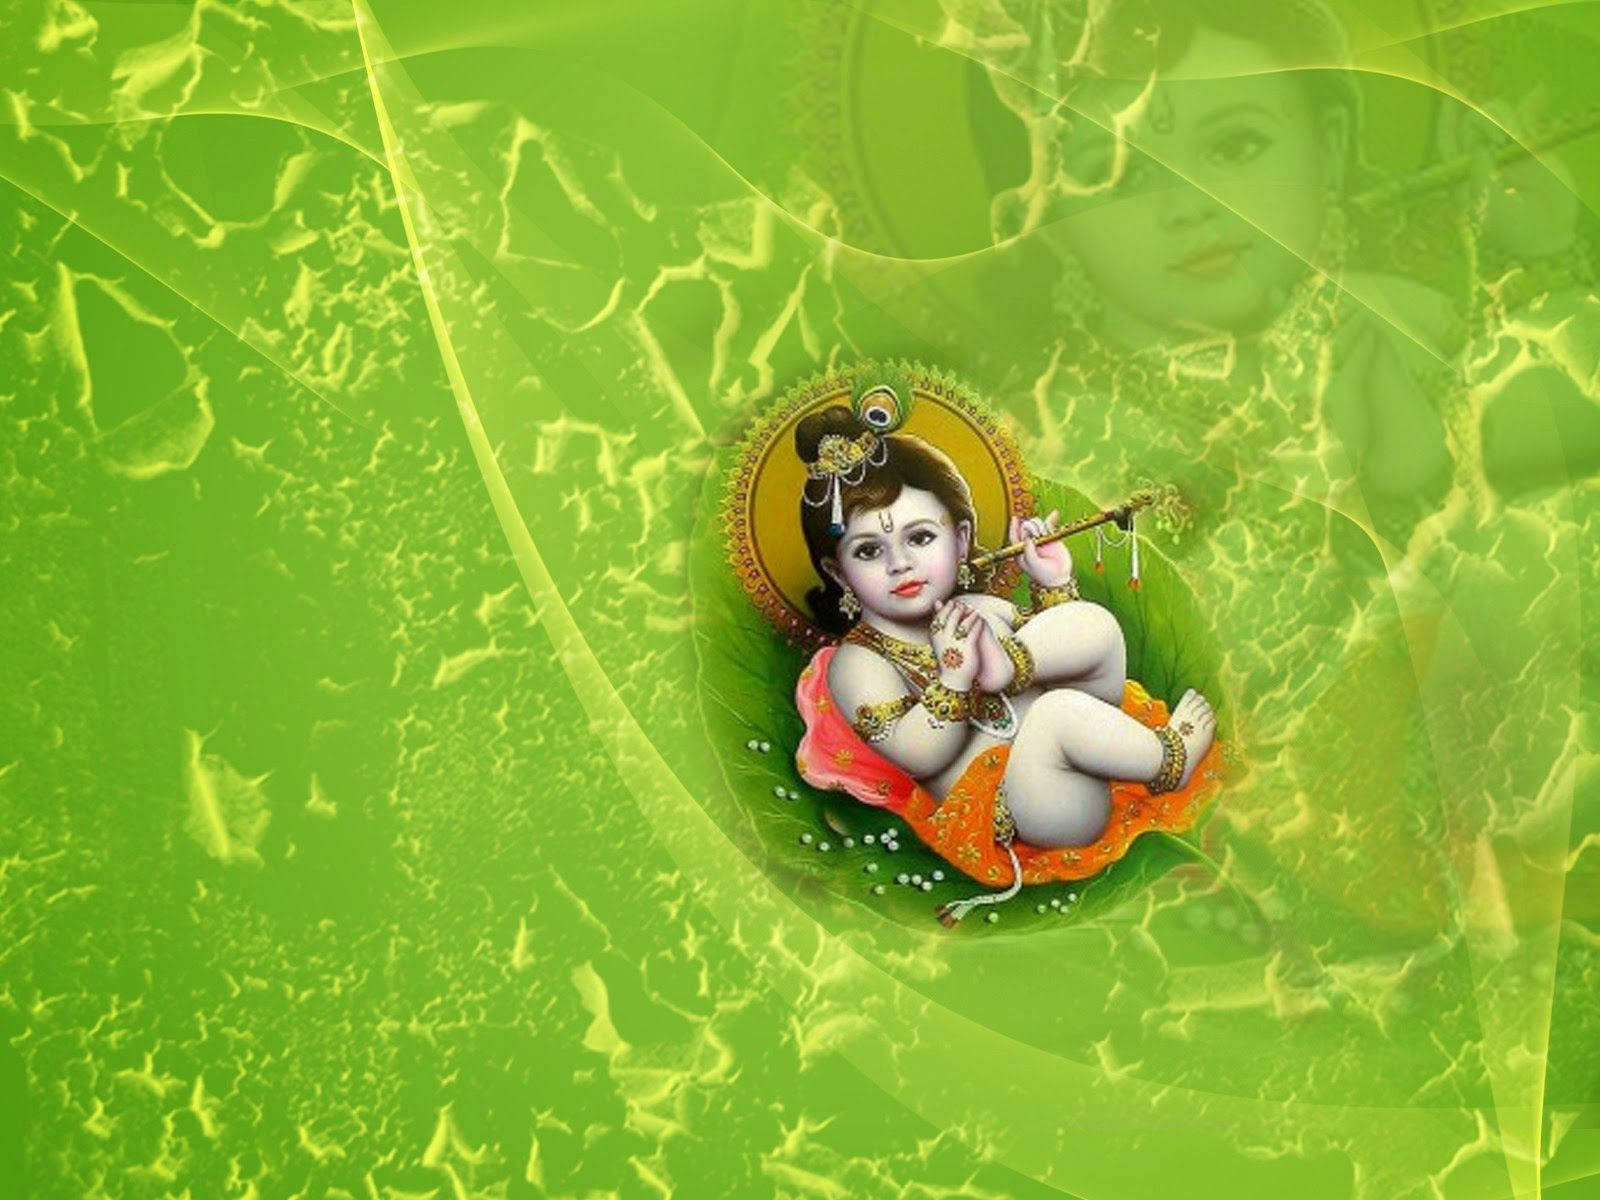 Free Gopal Wallpaper Downloads, [100+] Gopal Wallpapers for FREE |  